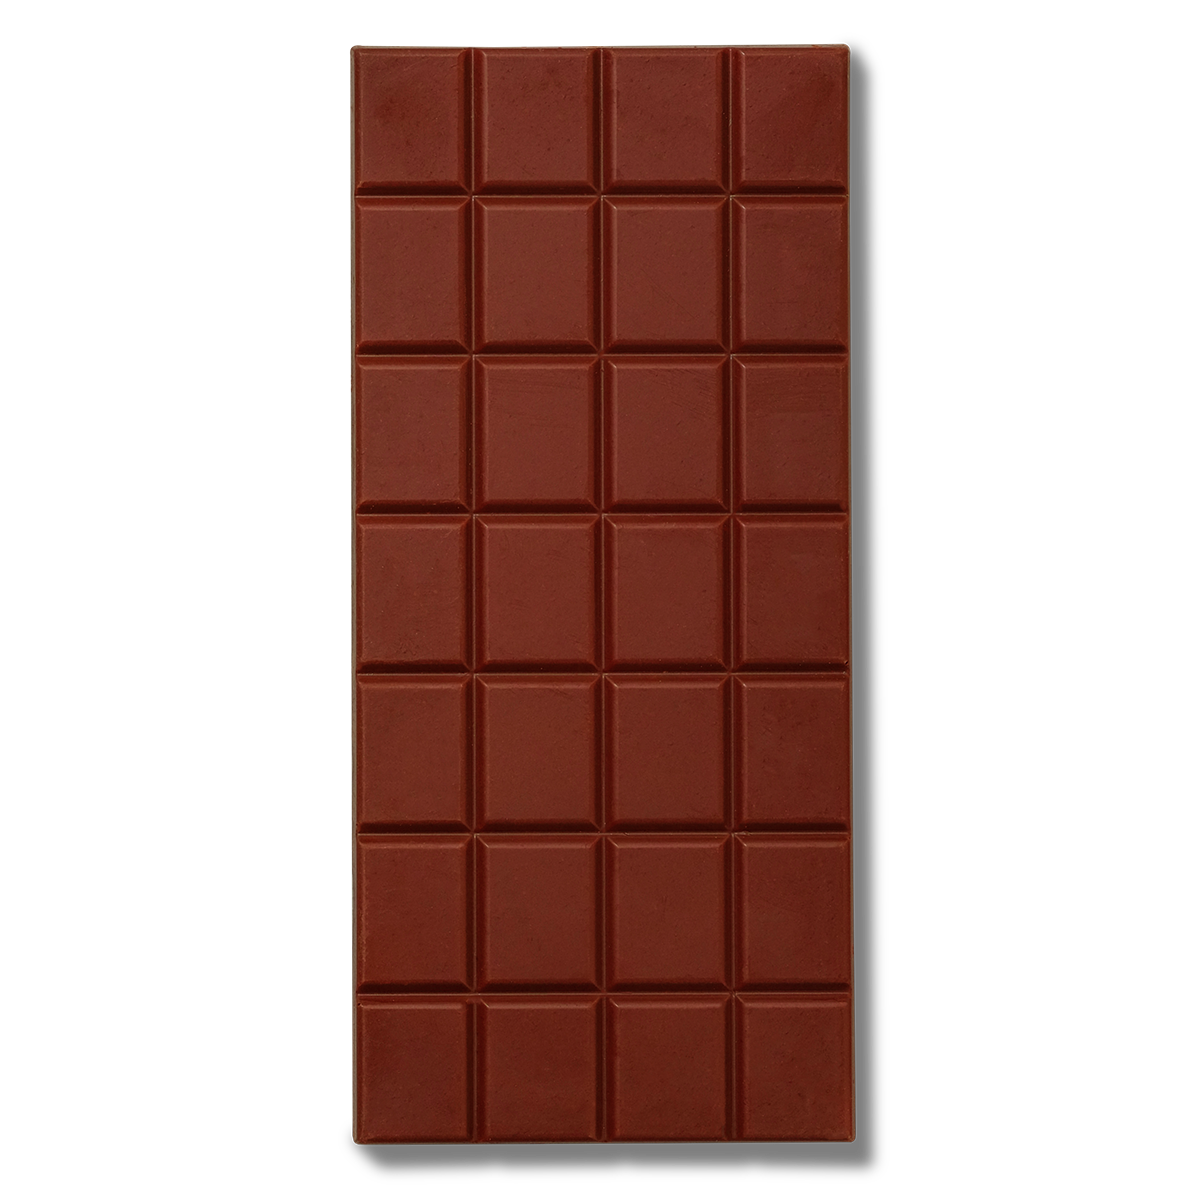 Olive Oil Chocolate